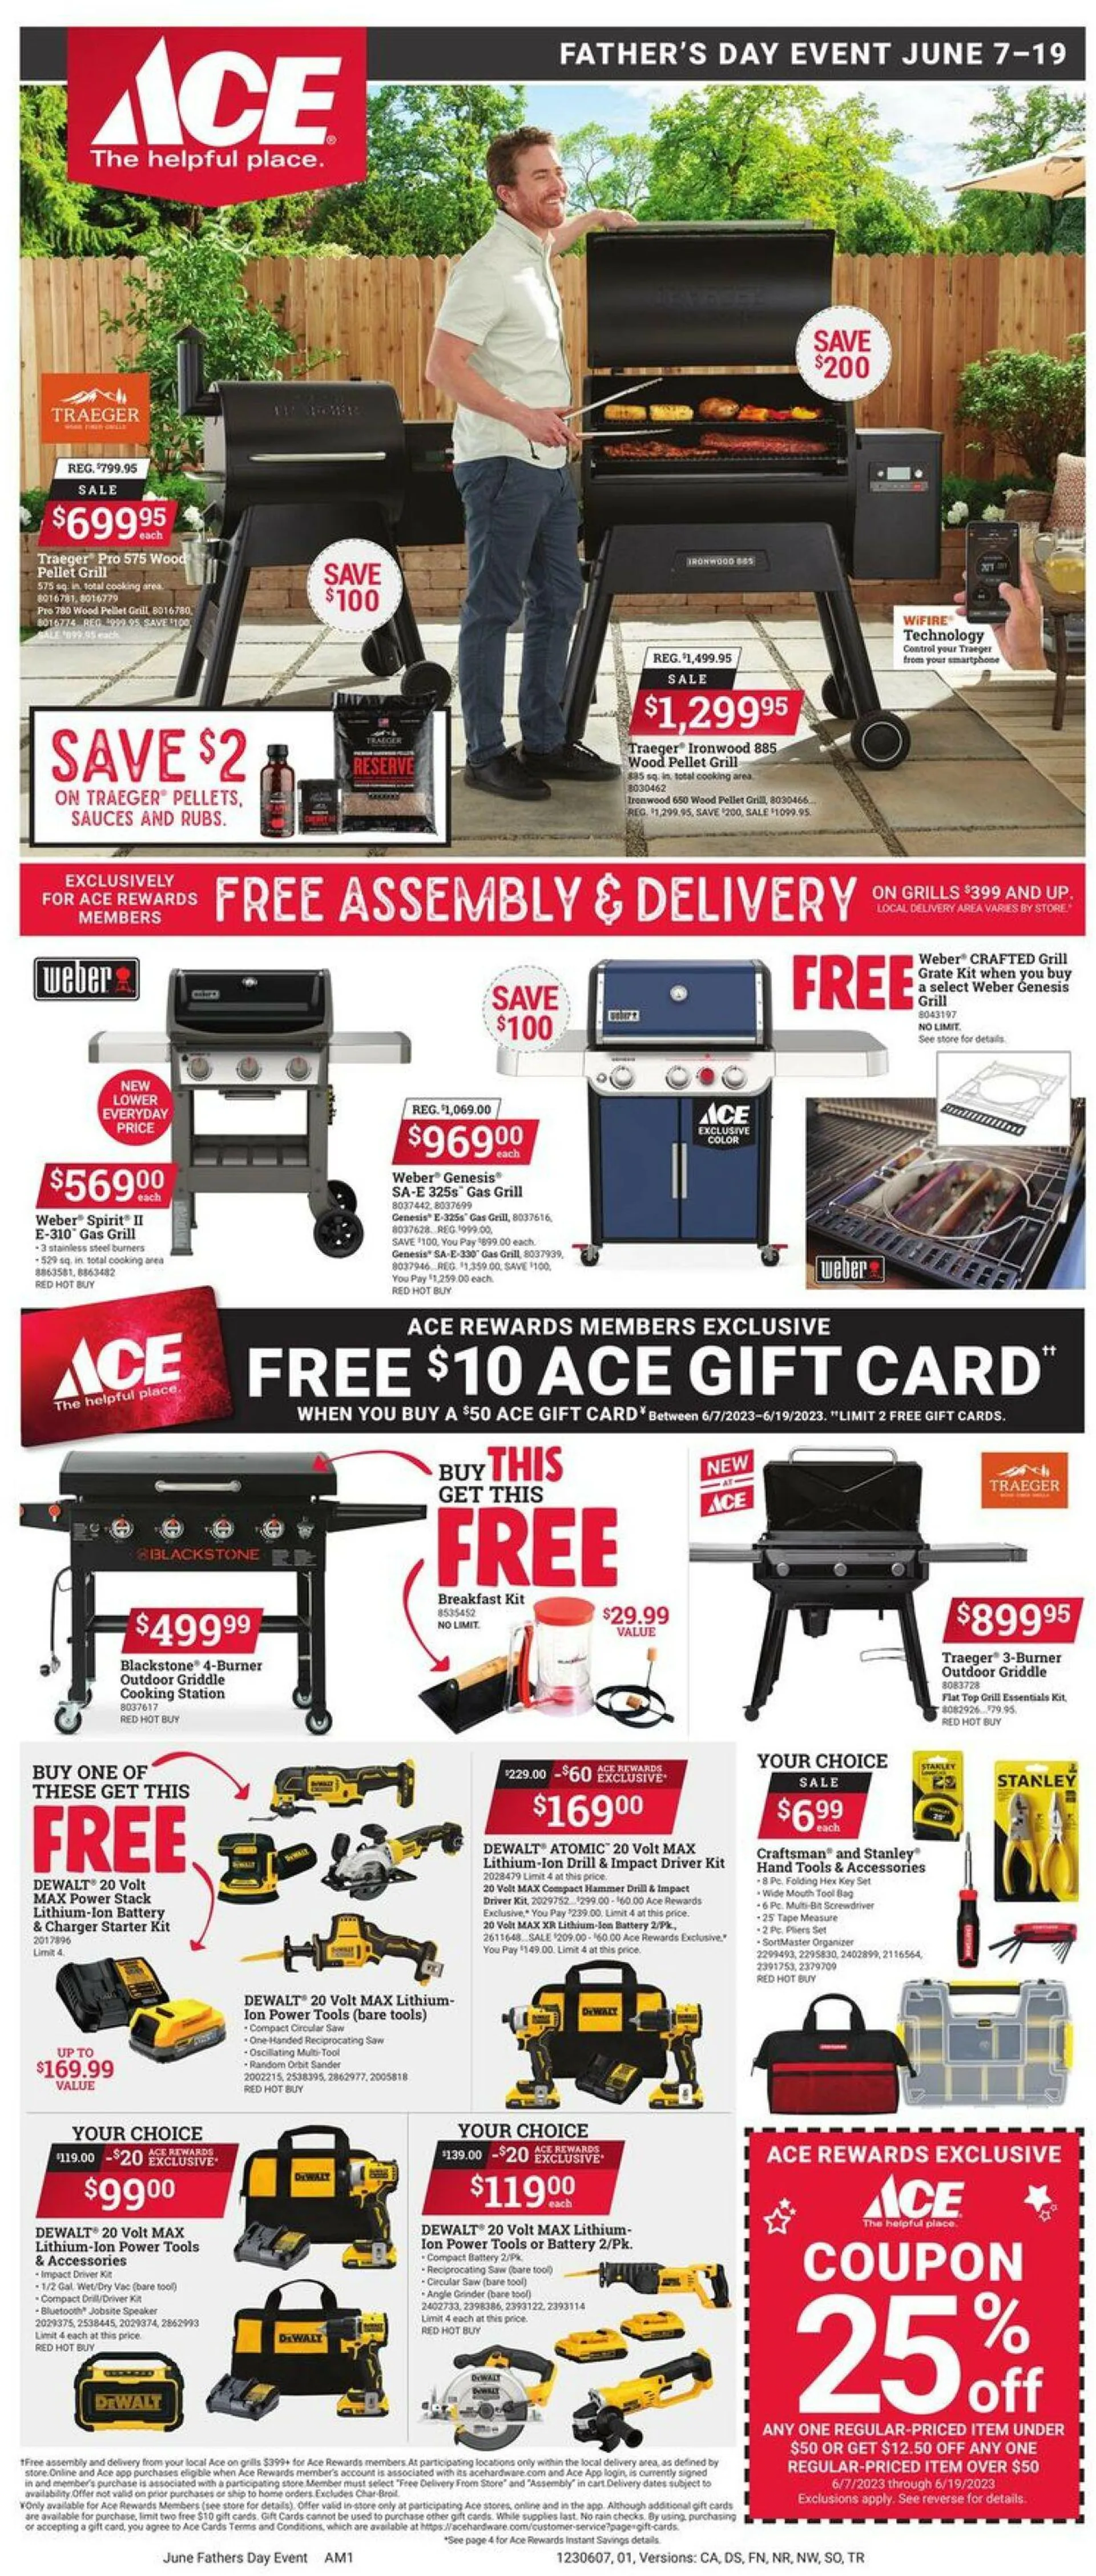 Ace Hardware Current weekly ad - 1